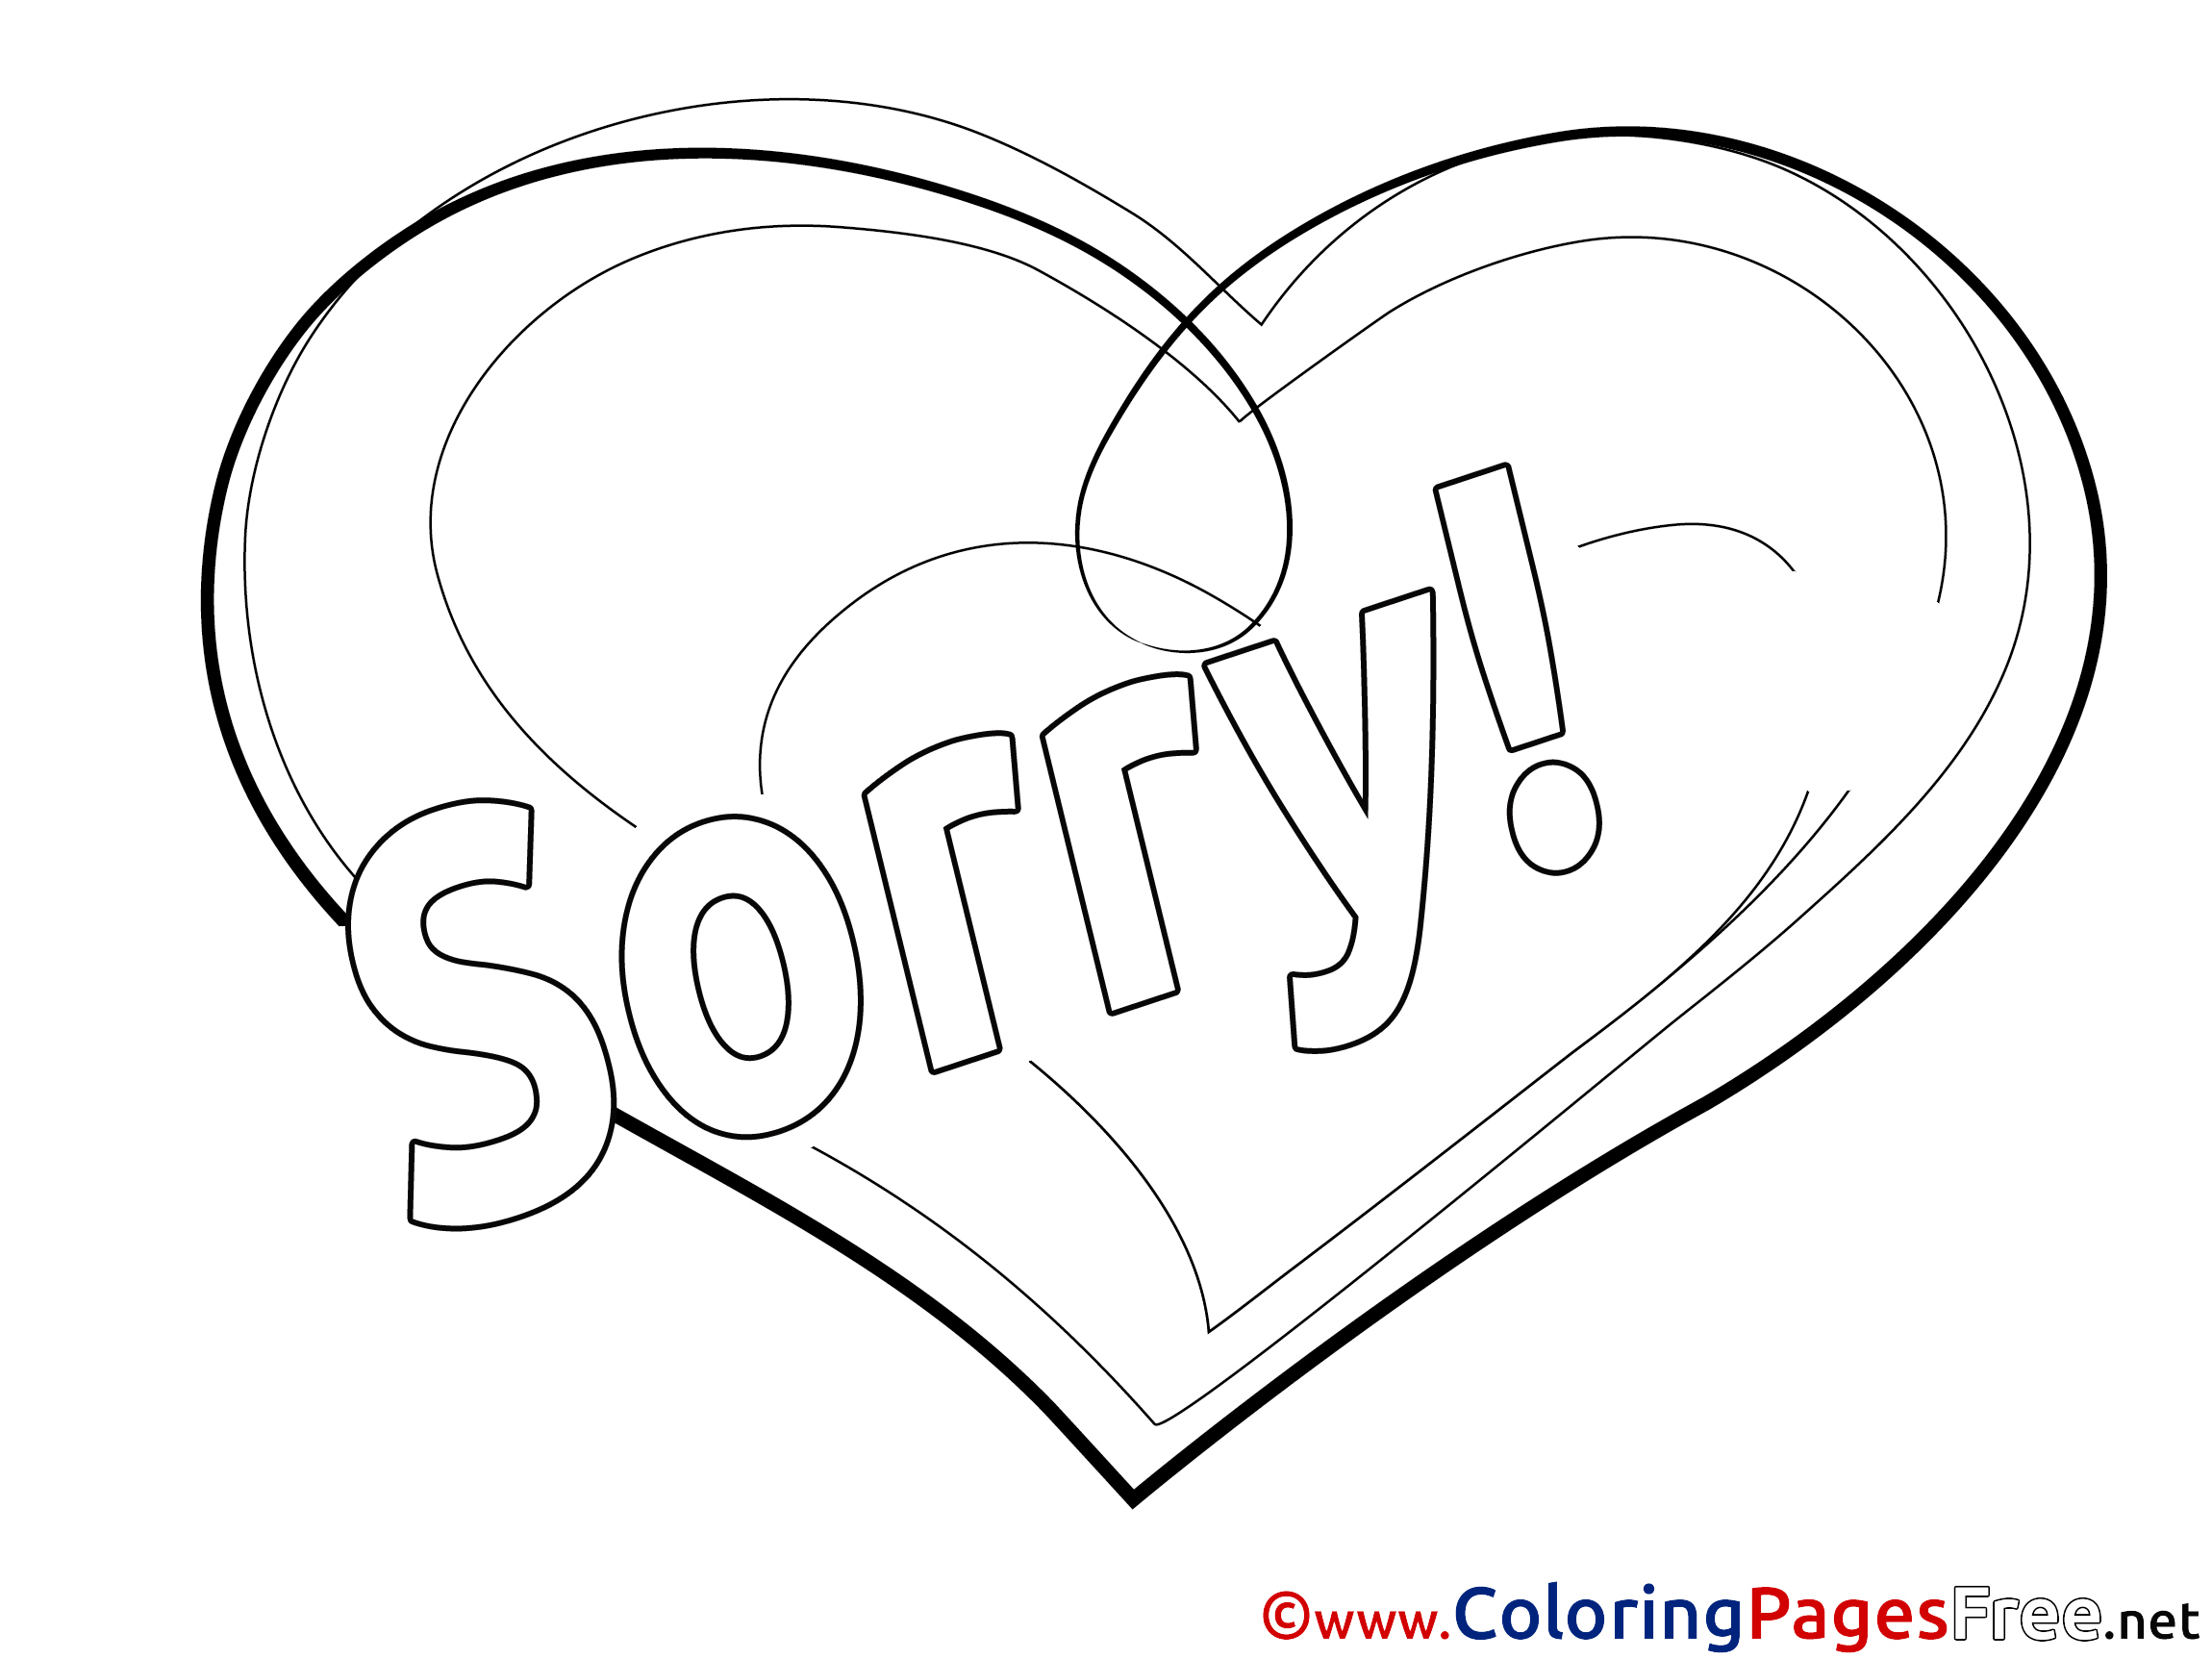 Apologetic Coloring Sheets 9